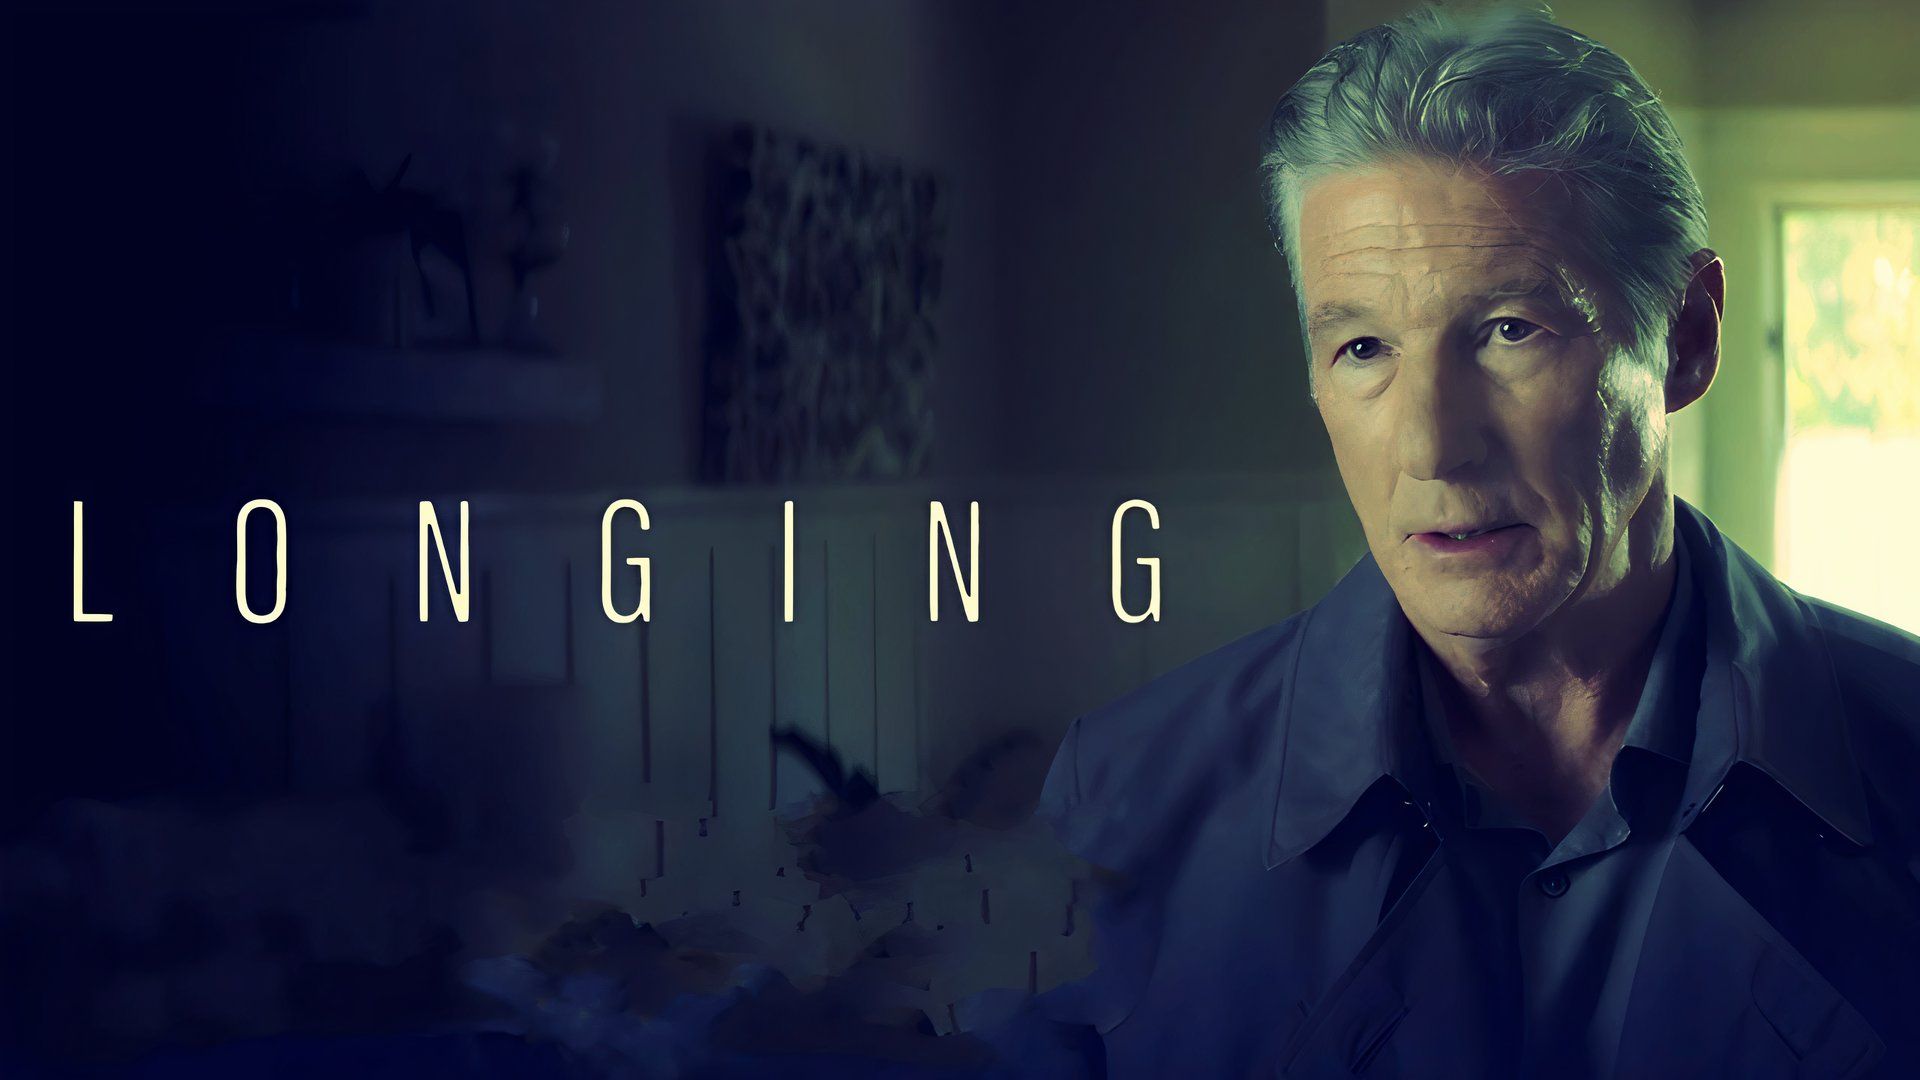 Longing with Richard Gere